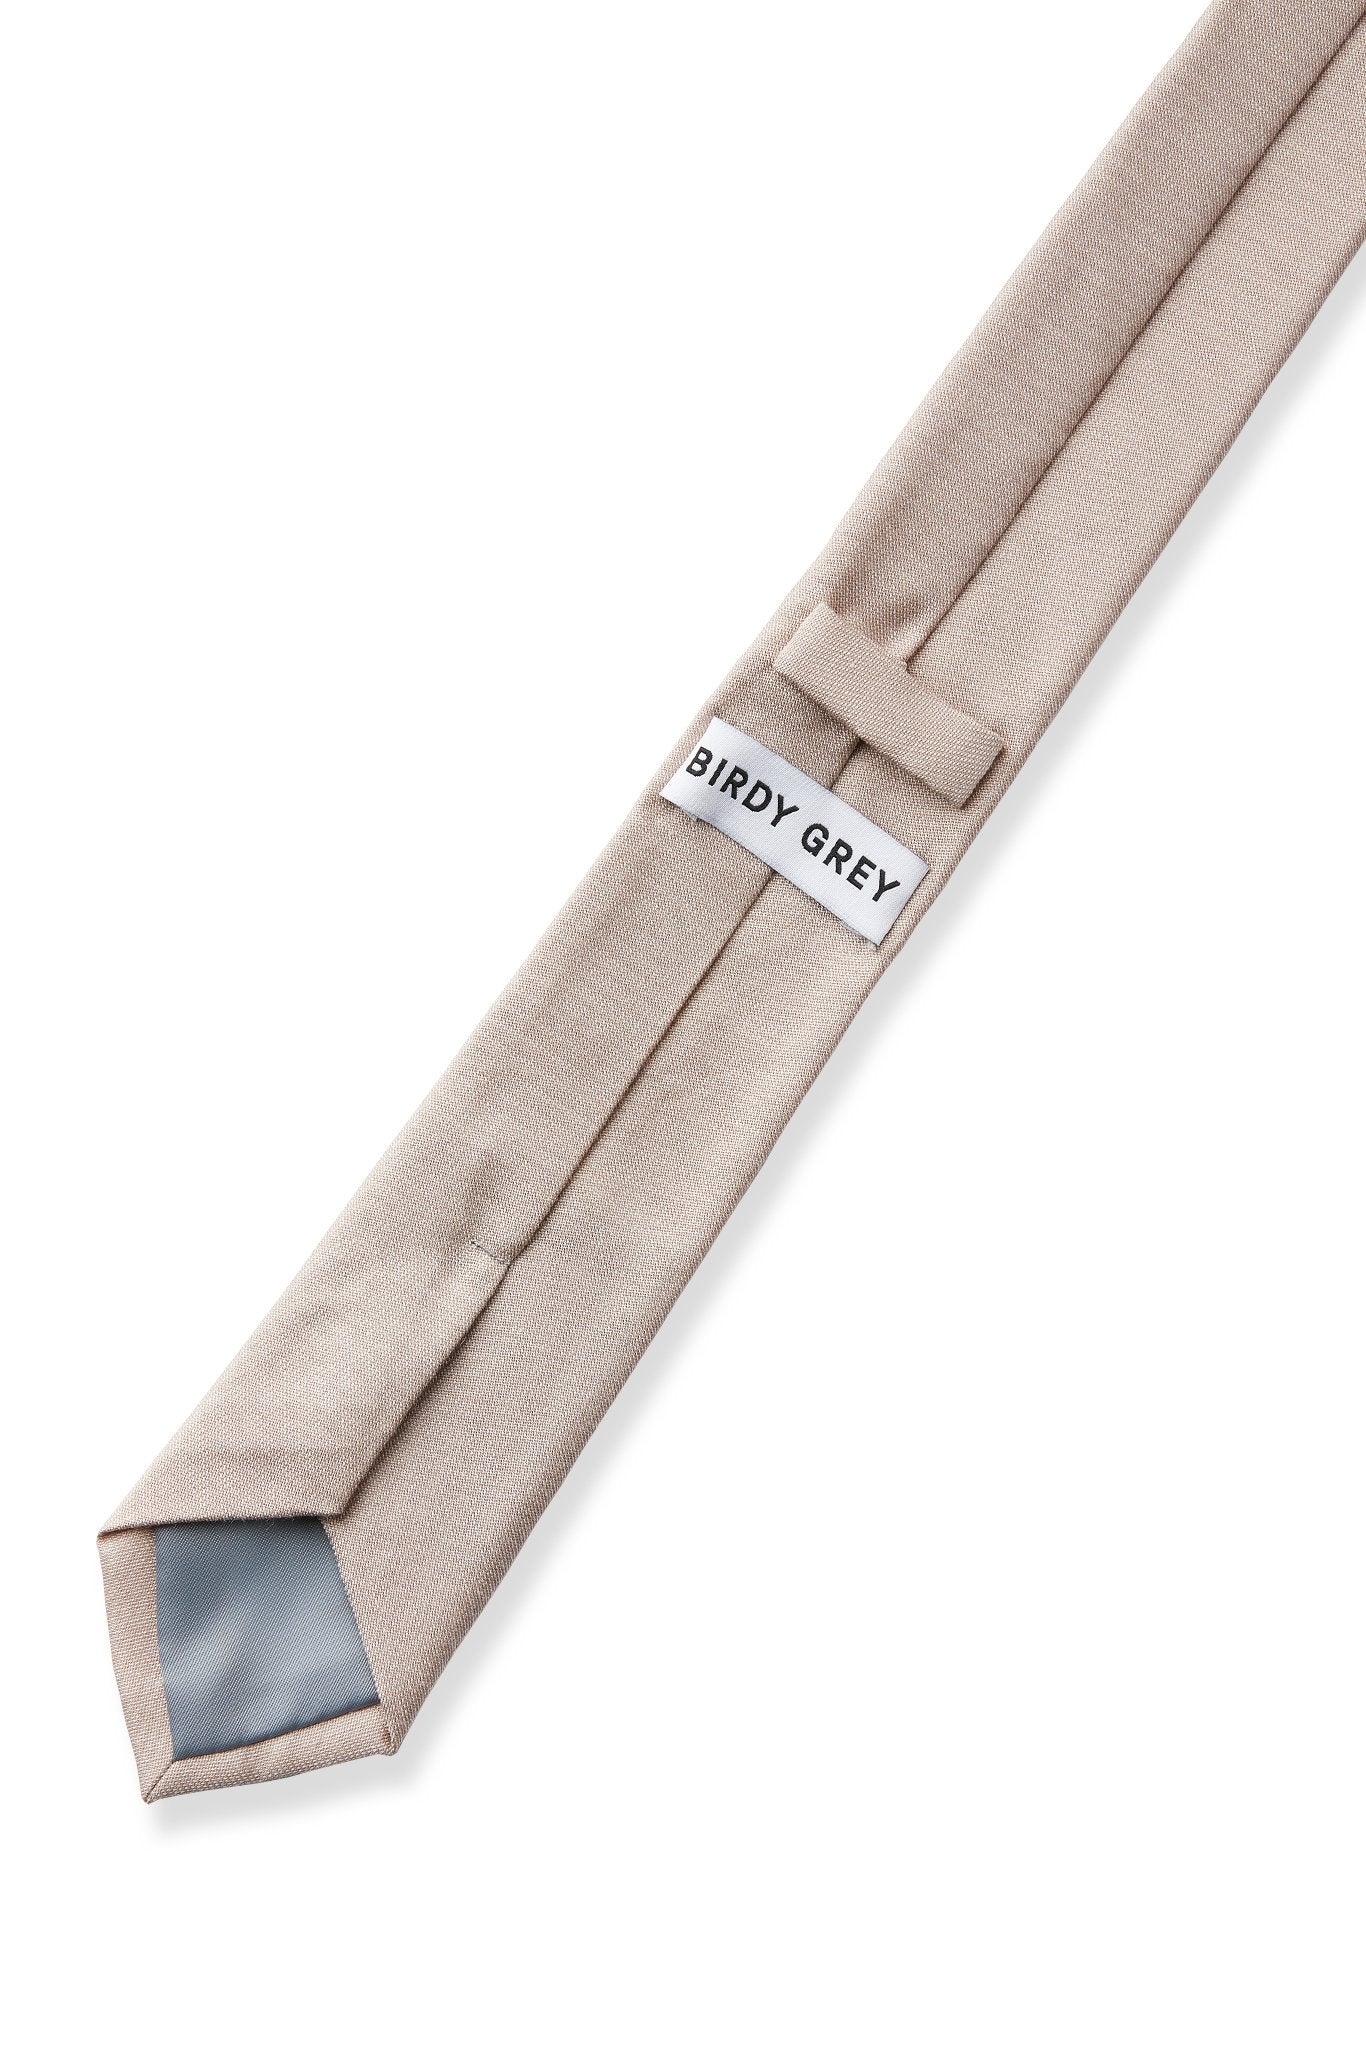 Elevated back view of the Simon Necktie in taupe fully extended on a white background showing necktie satin lining in grey, a keeper loop to tuck the necktie end, and a label that reads, 